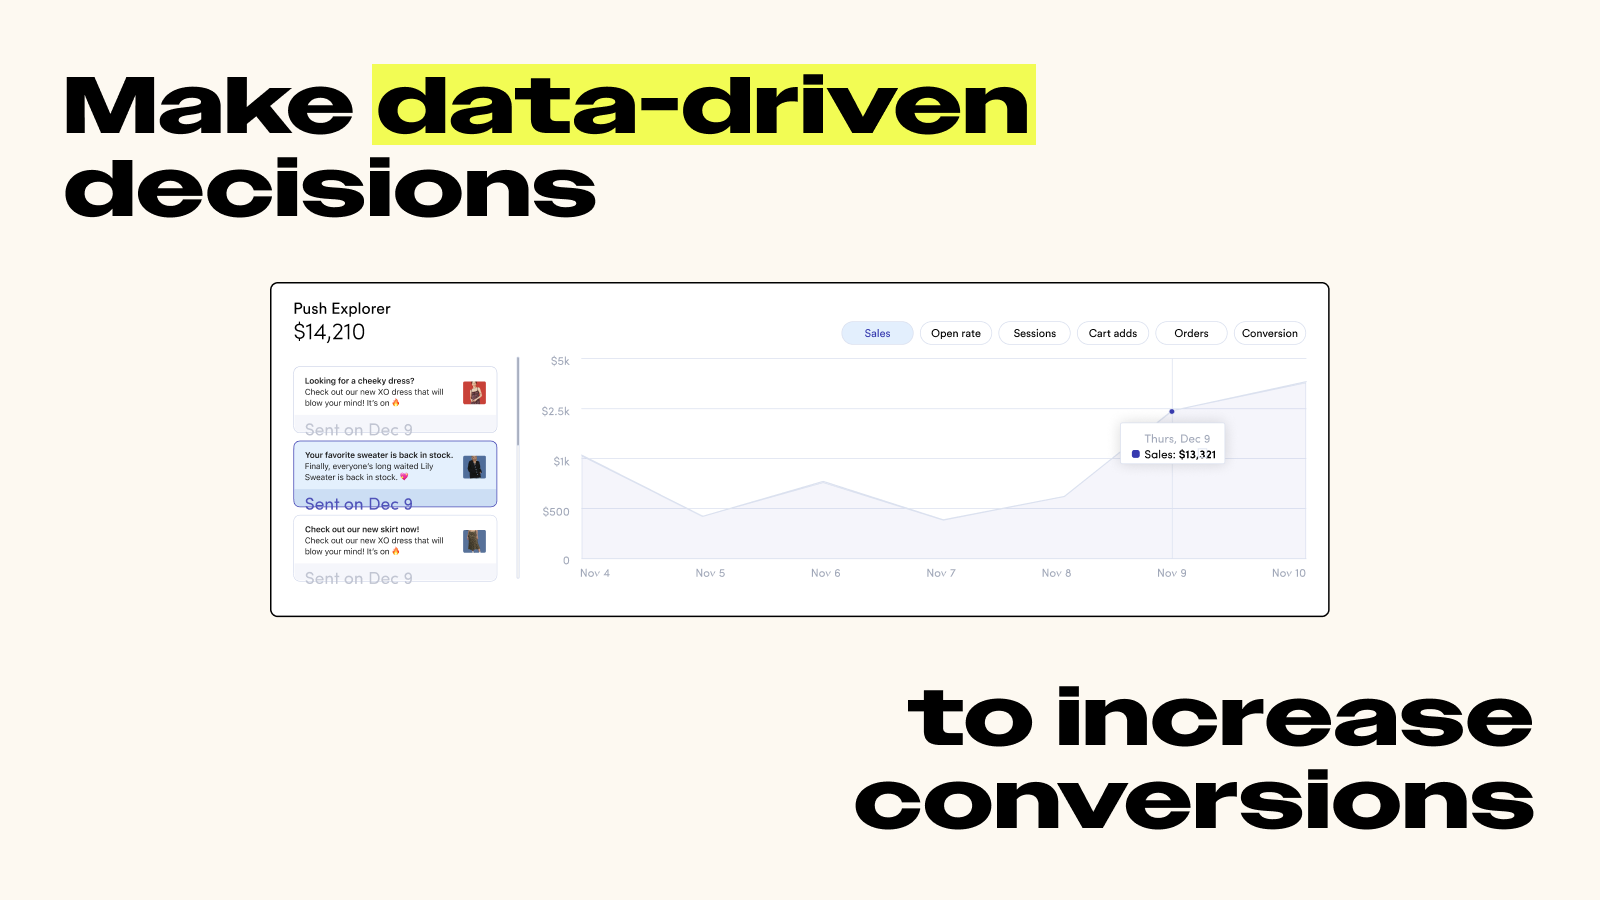 Increase conversions with advanced analytics and data